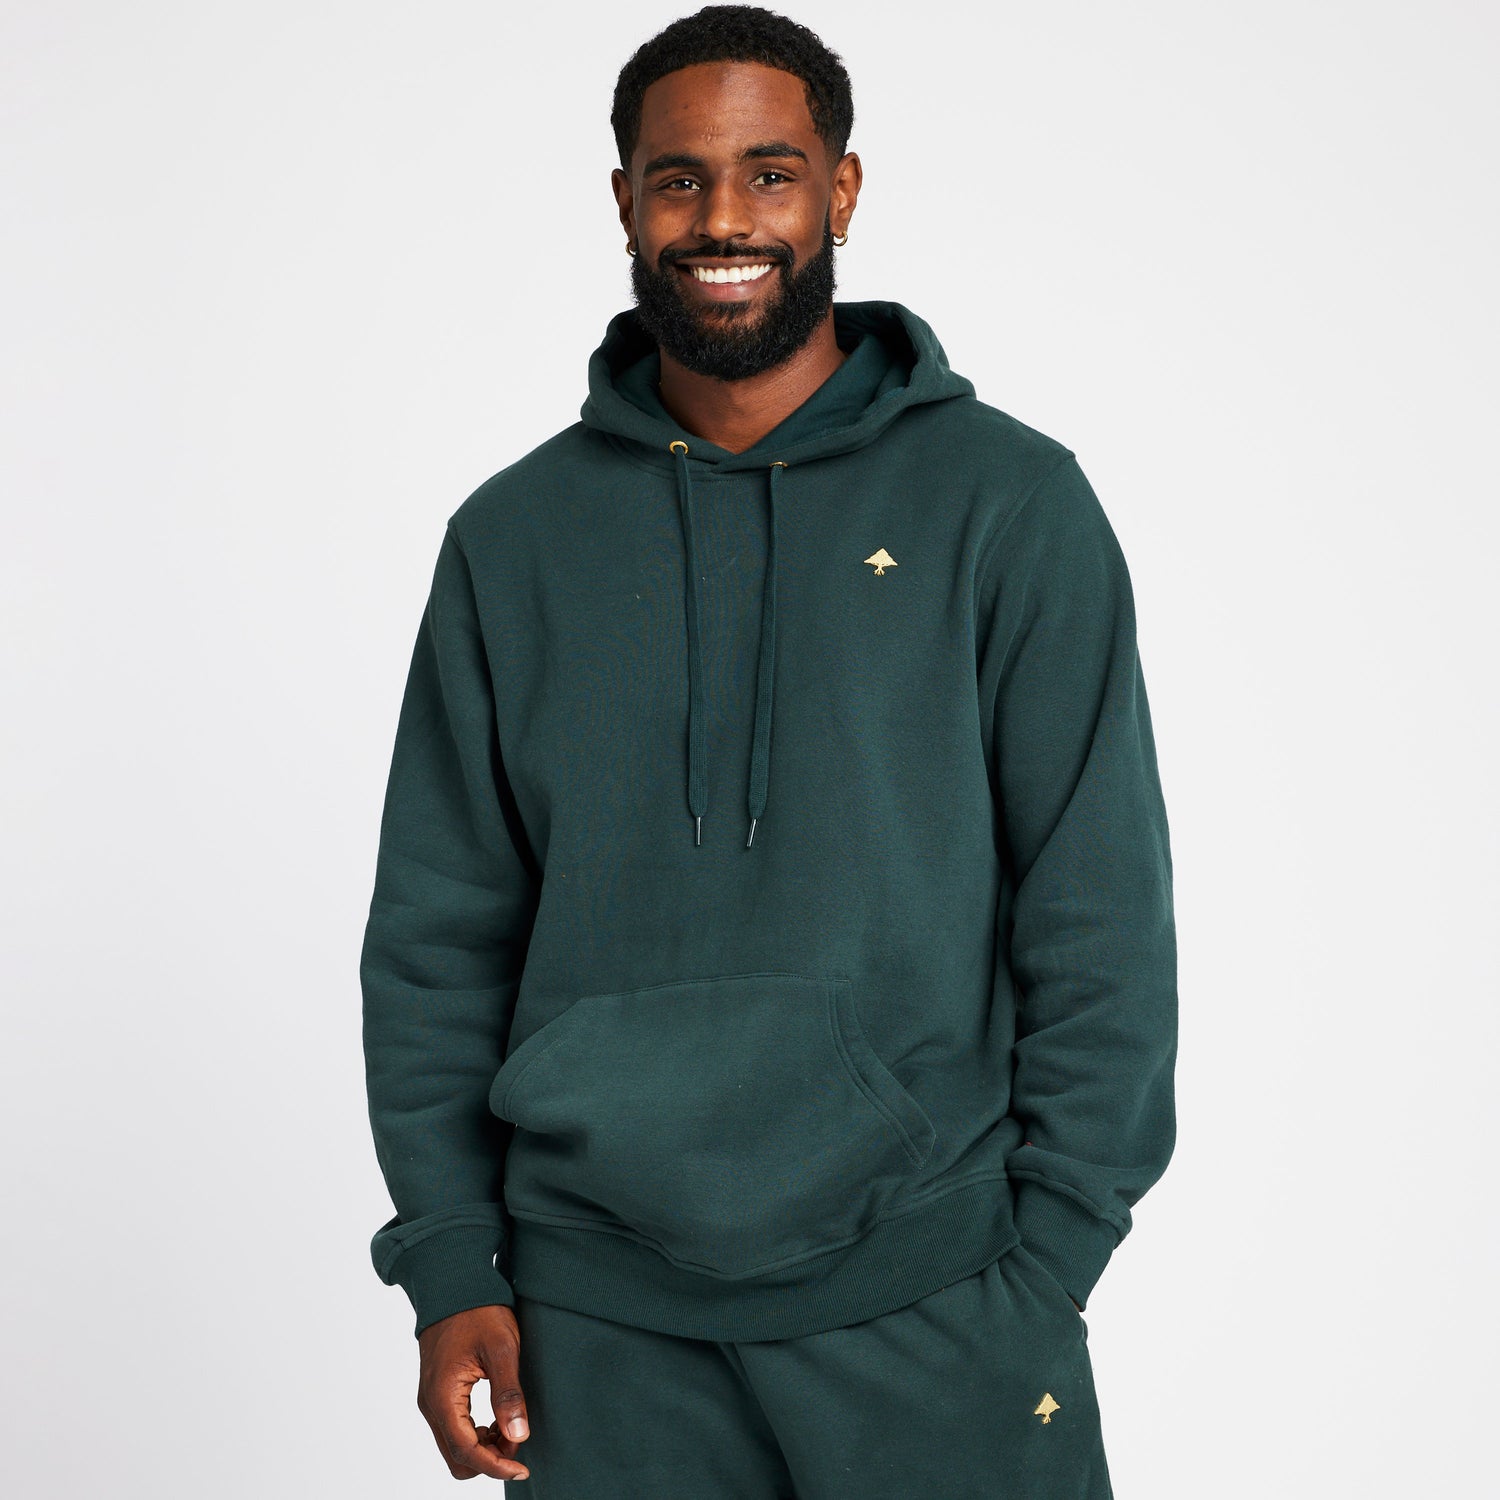 NOTHING BUT GOLD PULLOVER HOODIE - DARK SPRUCE